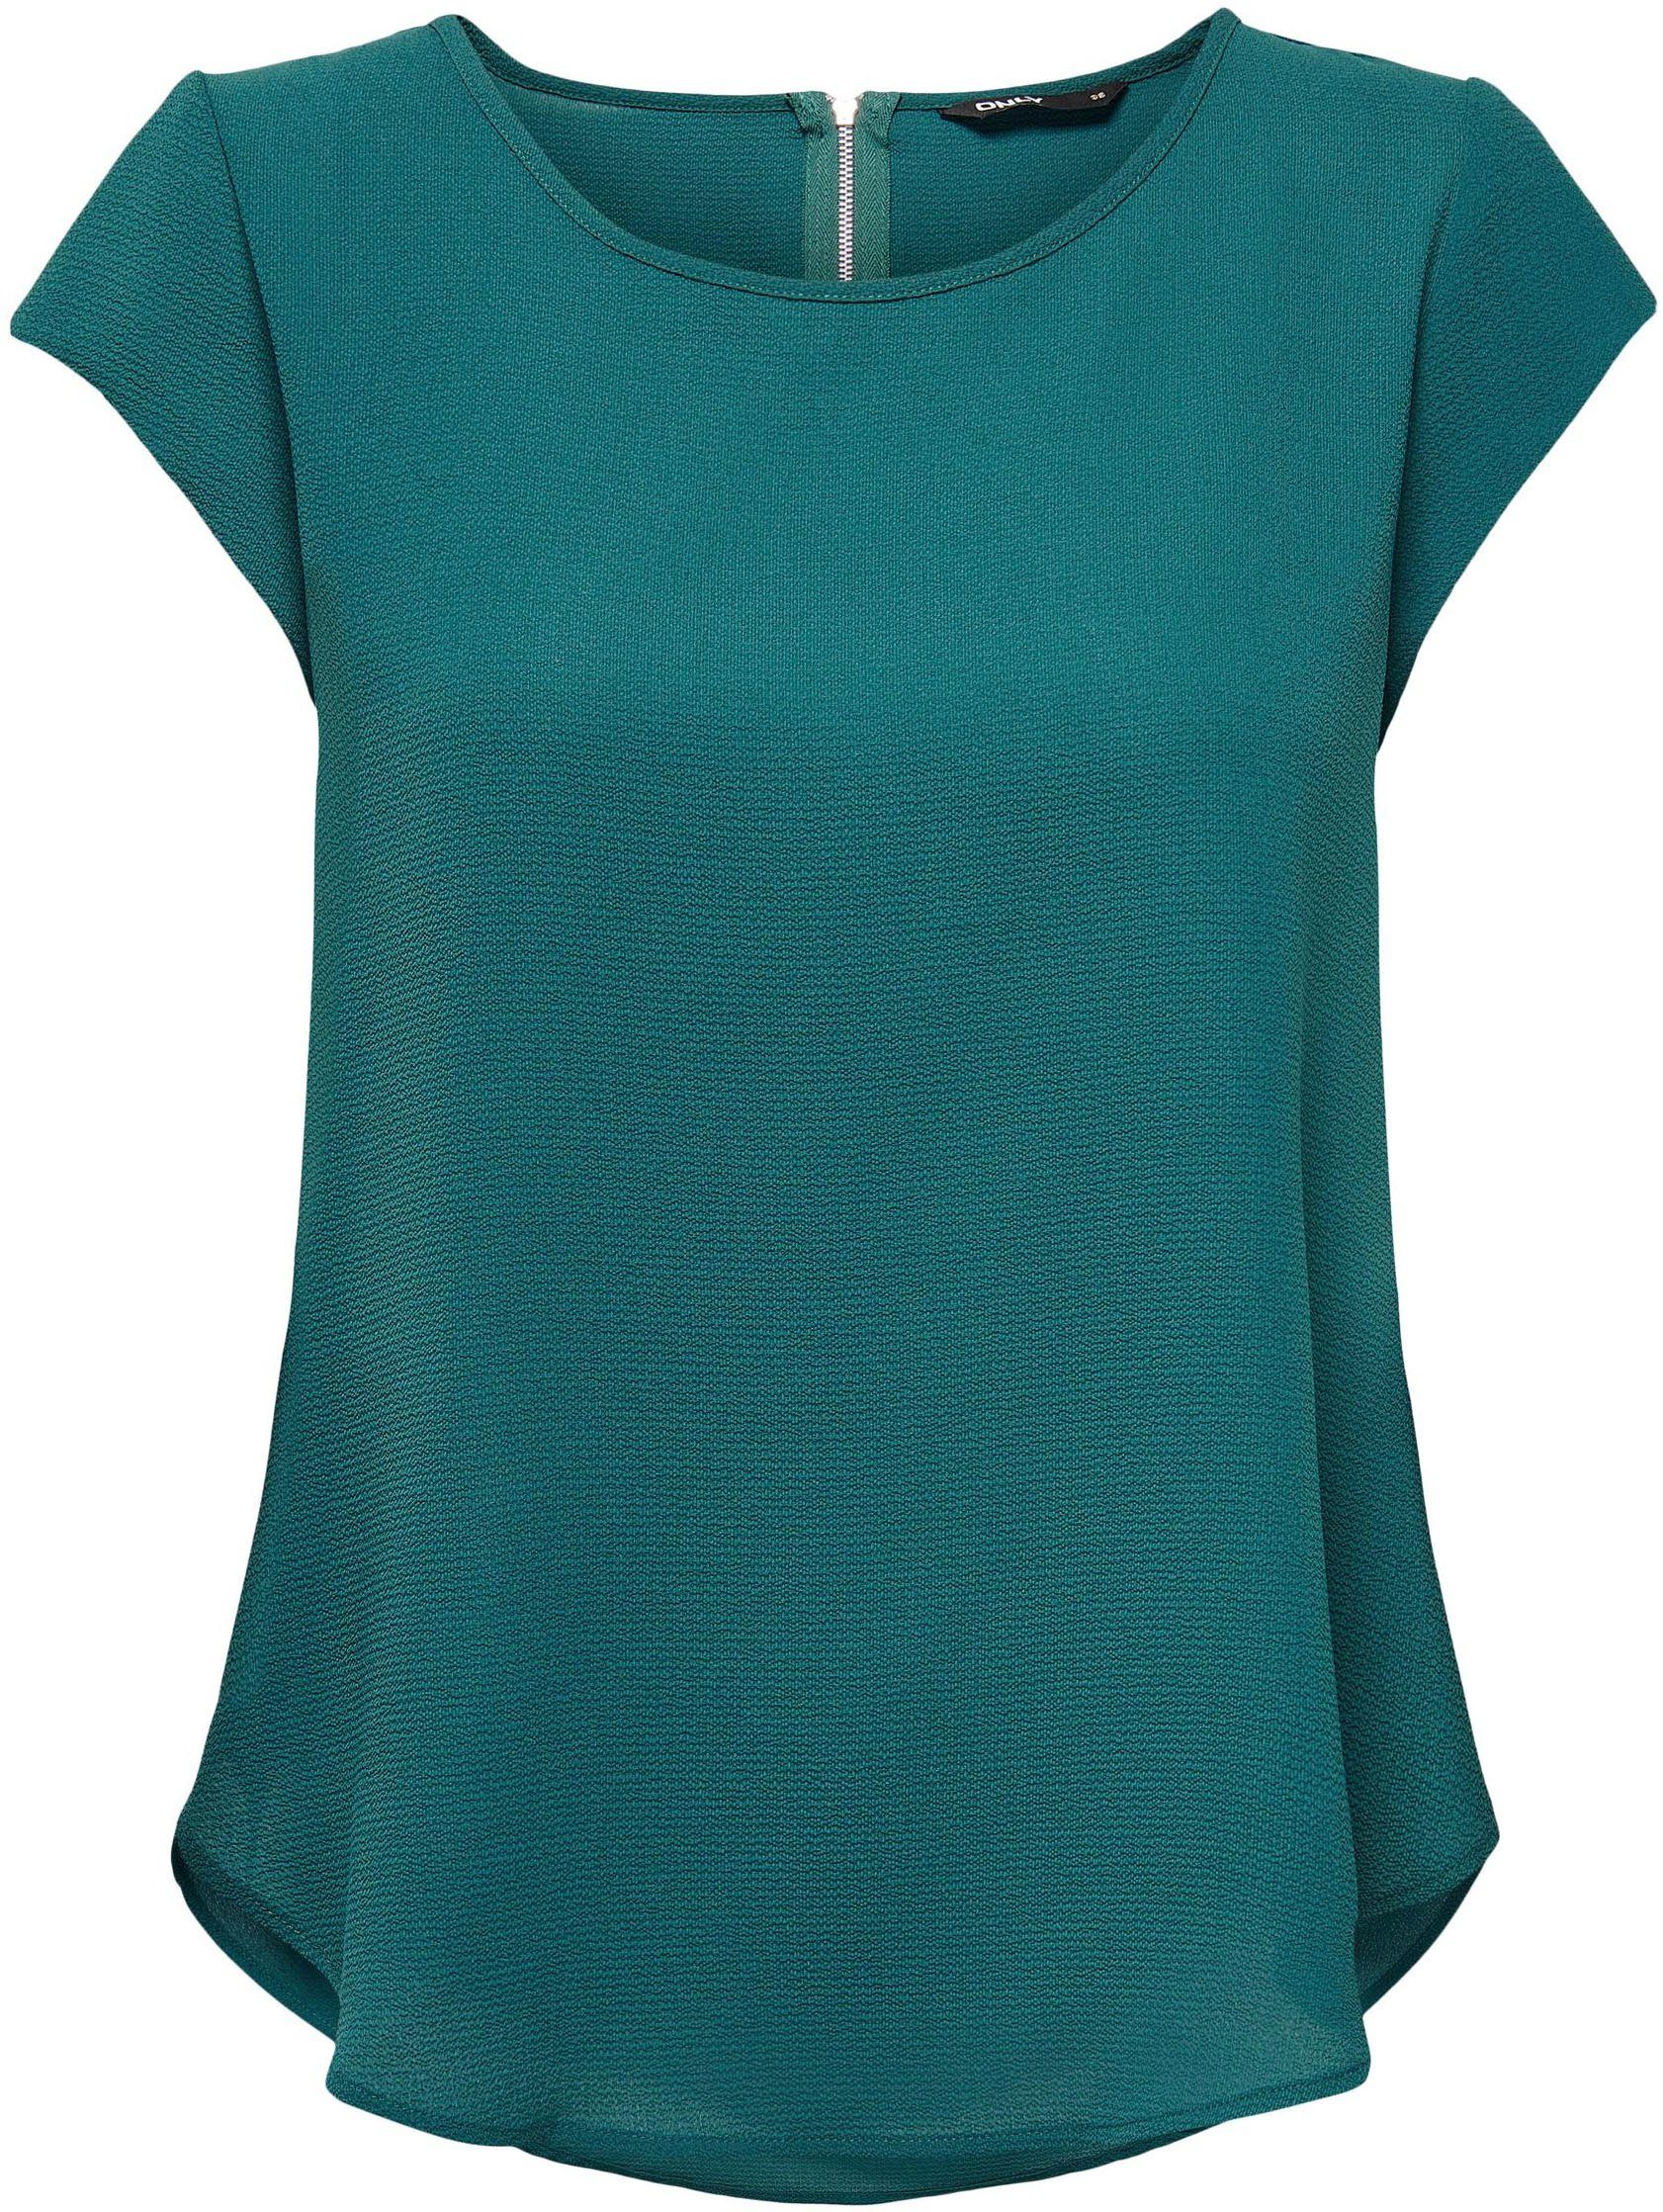 S/S TOP PTM Kurzarmbluse ONLVIC Teal Deep SOLID ONLY NOOS